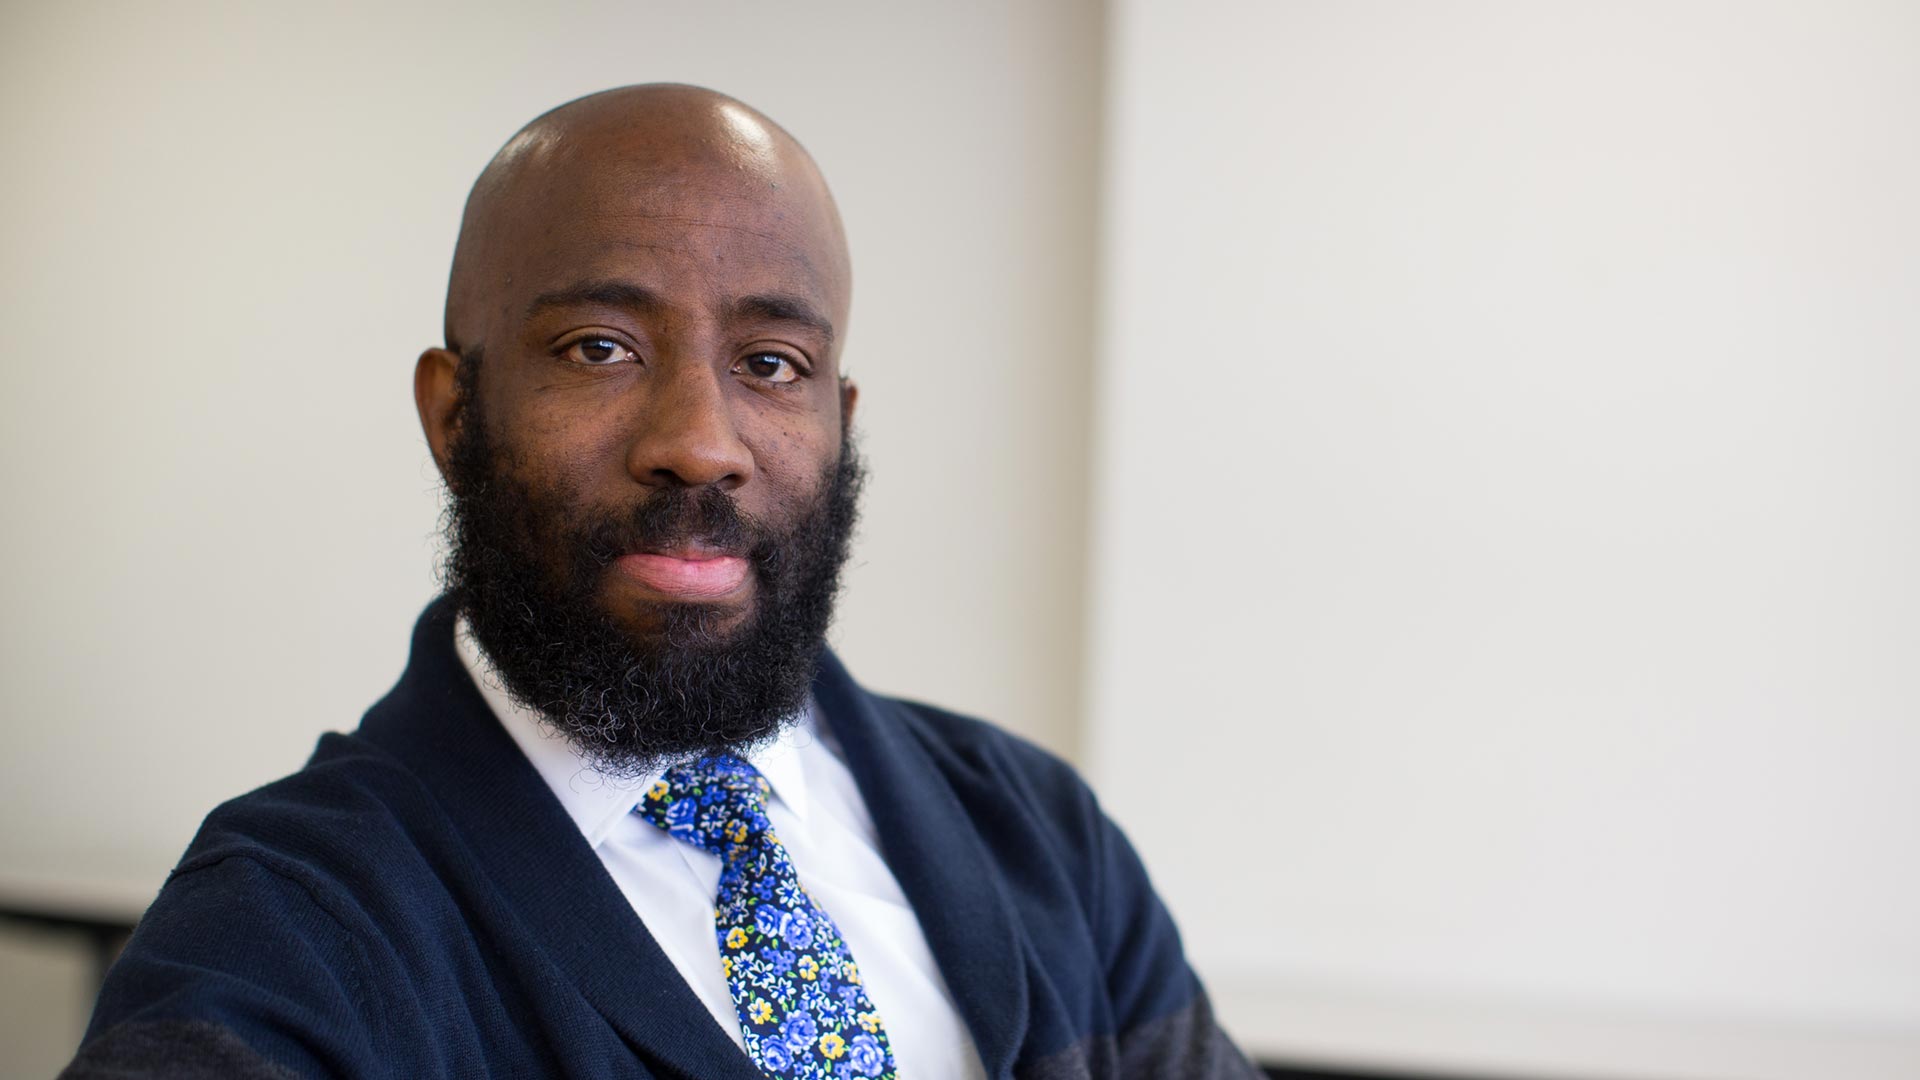 Earle Chambers, Ph.D., M.P.H., Appointed Director of Research in Department of Family and Social Medicine at Einstein and Montefiore